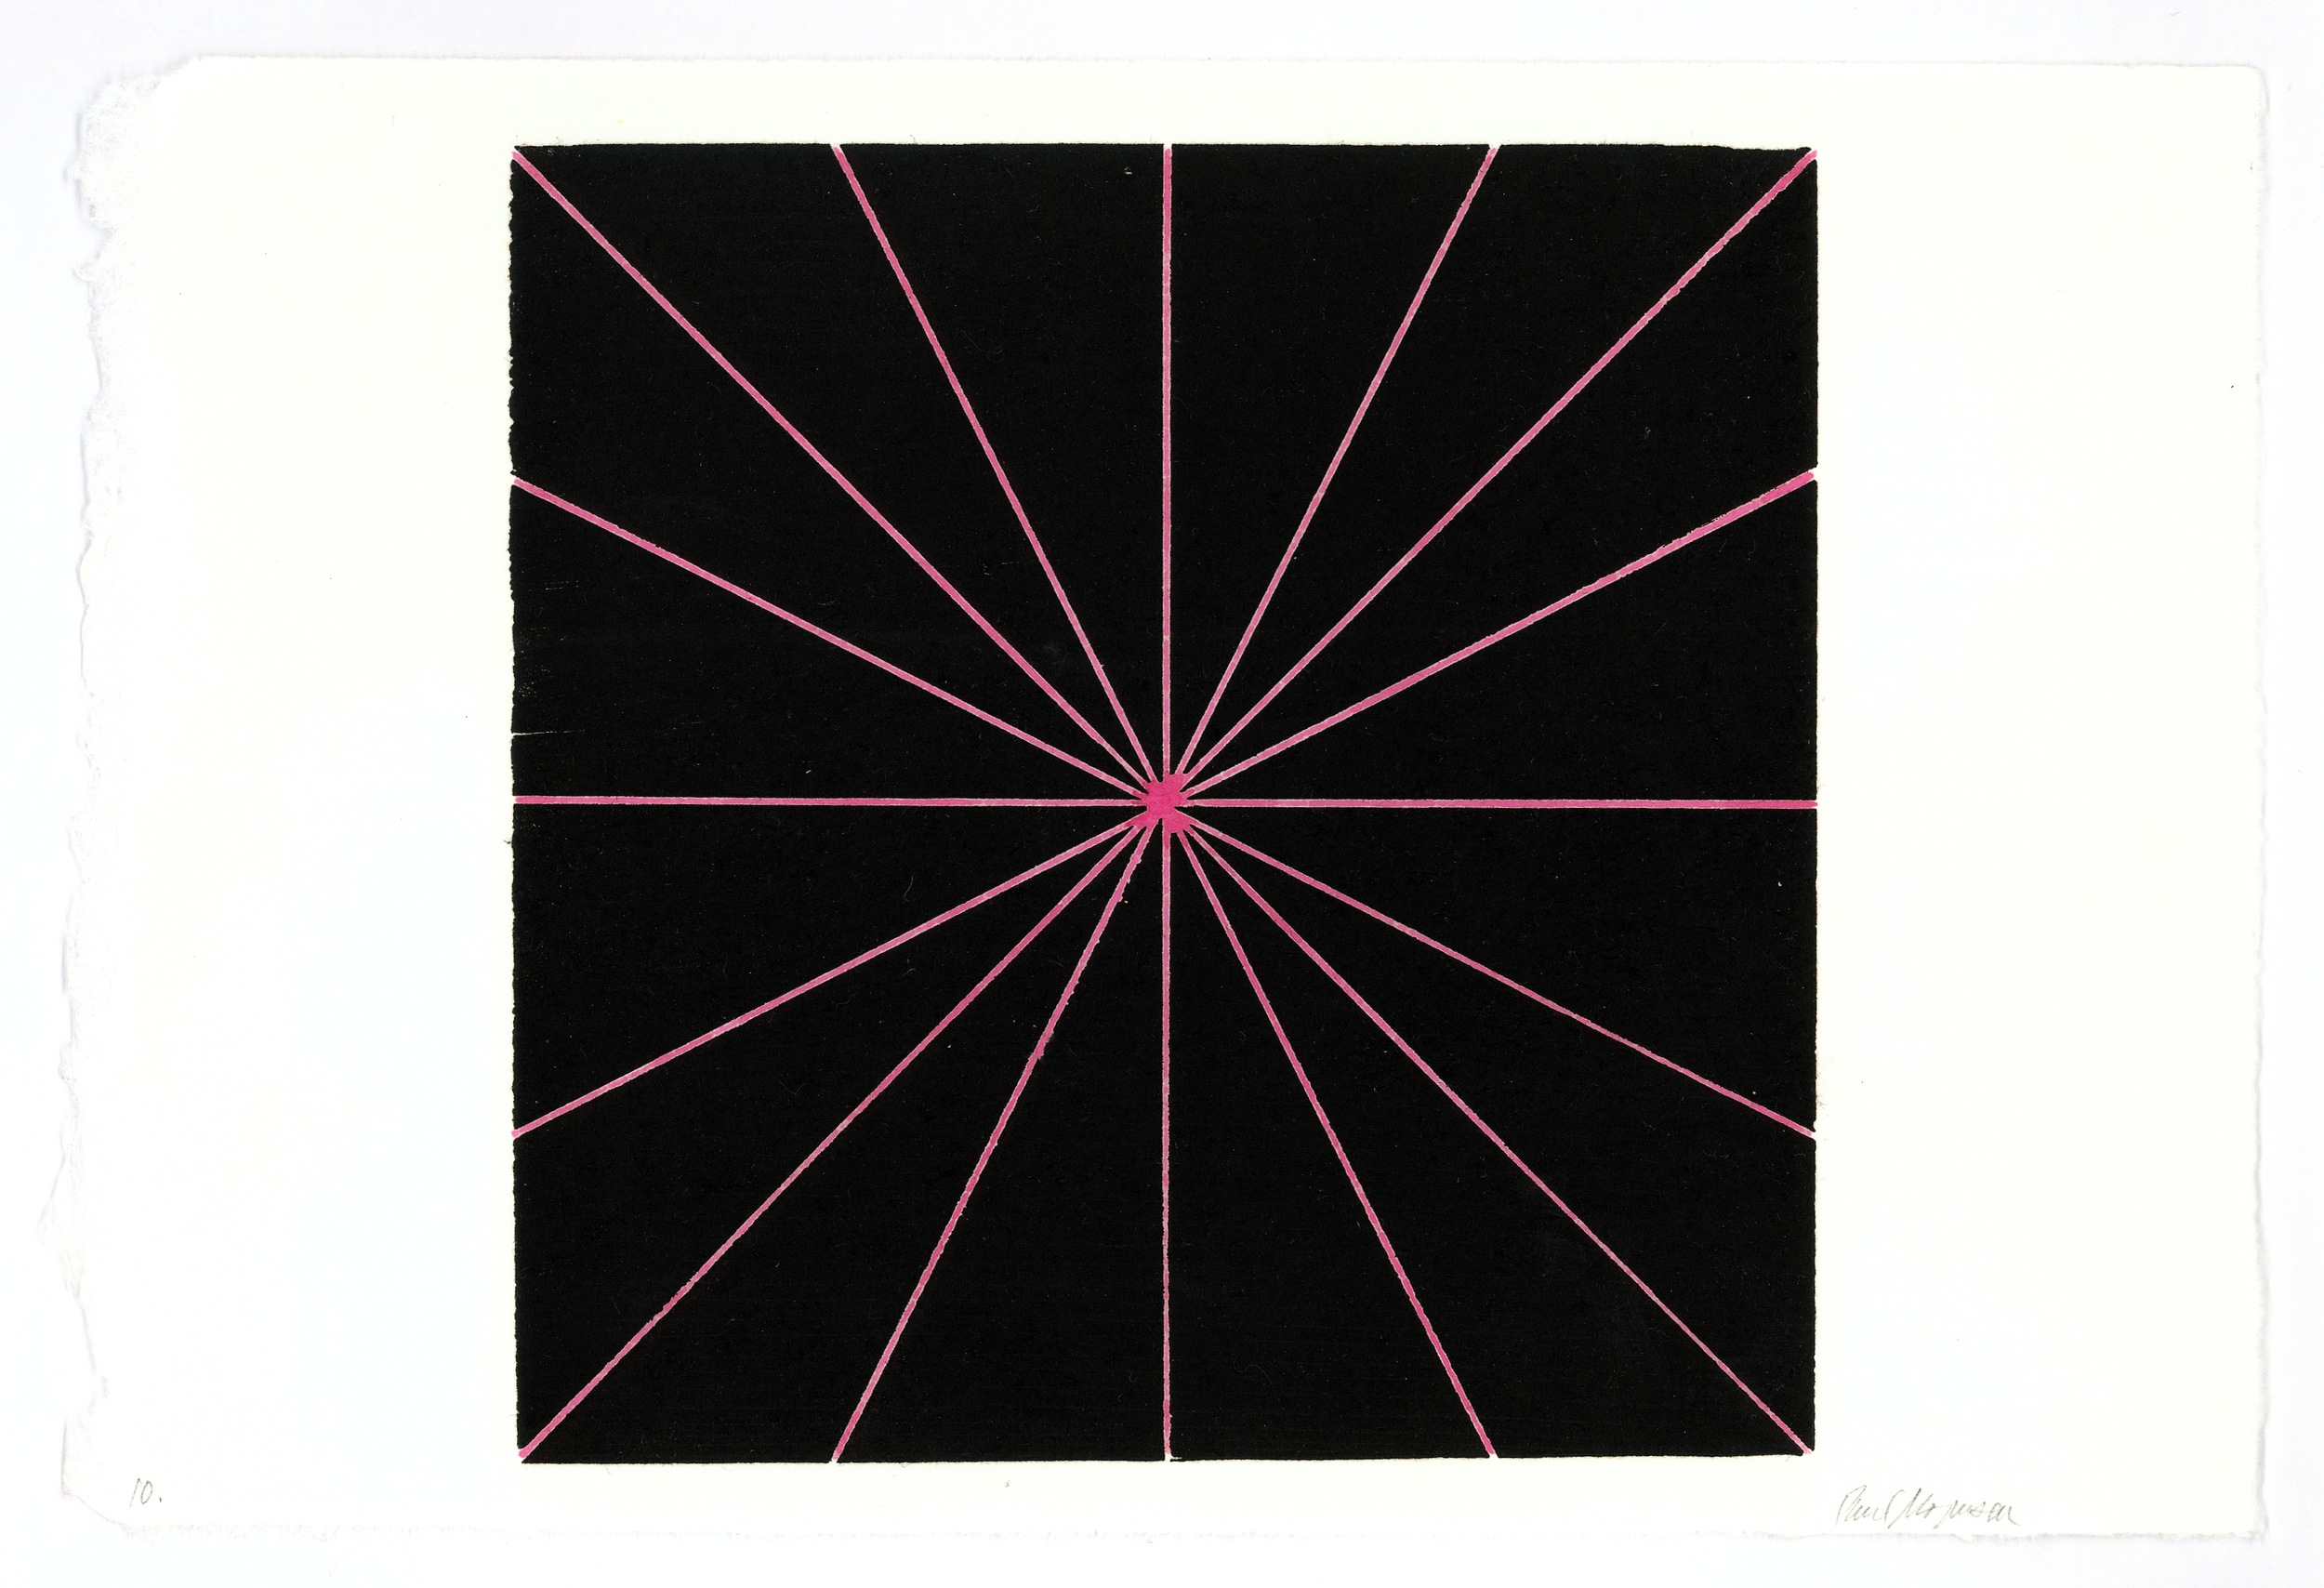  Lines to Center, Pink &amp; Black,&nbsp;10 1/4 x 15 in.,&nbsp;Ink &amp; diluted carmine ink 